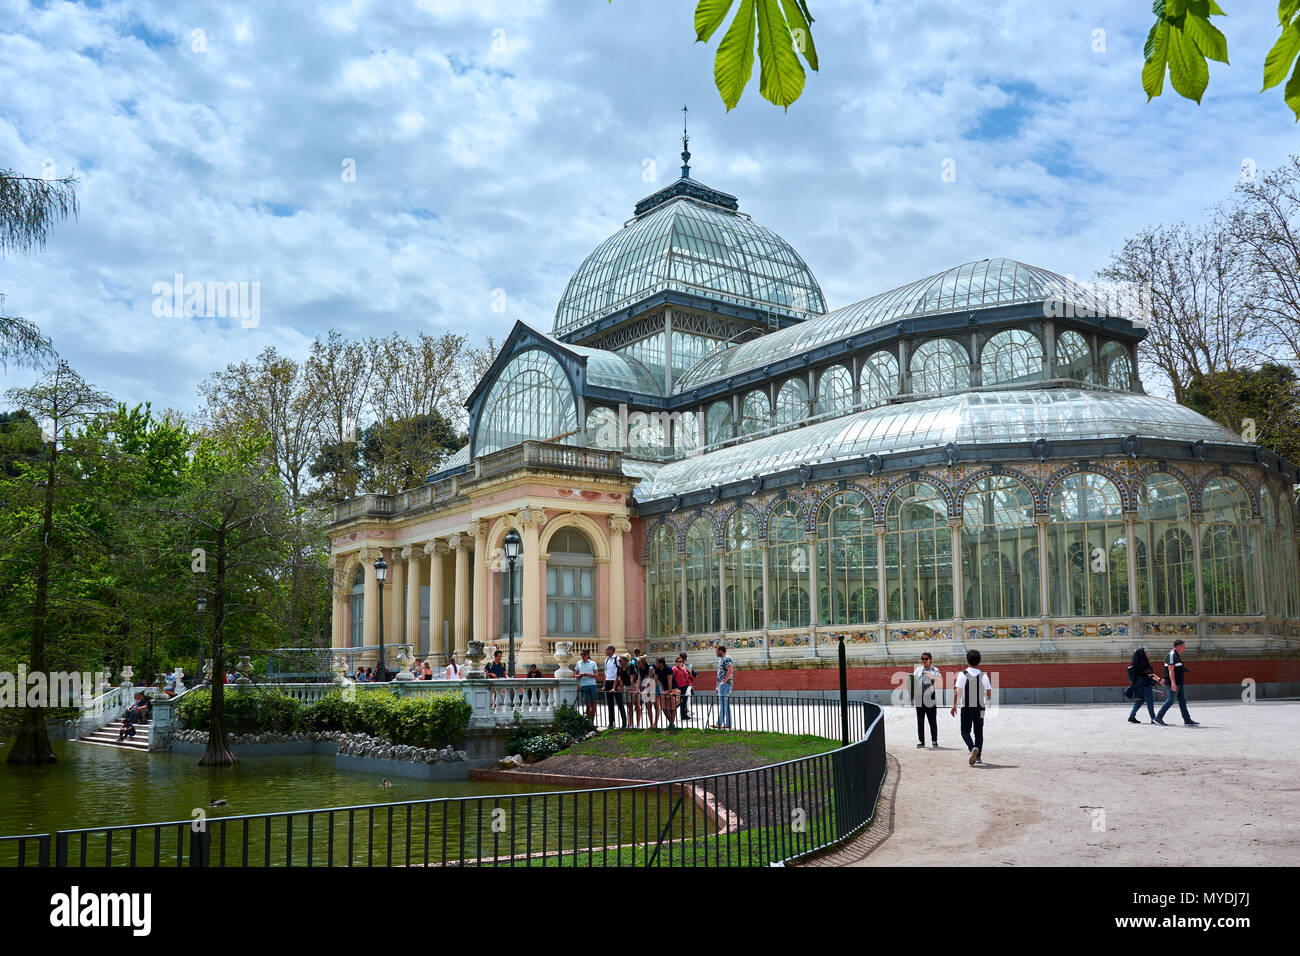 MADRID, SPAIN - APRIL 23, 2018: Beautiful view of the majestic Glass Palace in the Park of Good Retirement (Parque del Buen Retiro) of Madrid, Spain. Stock Photo